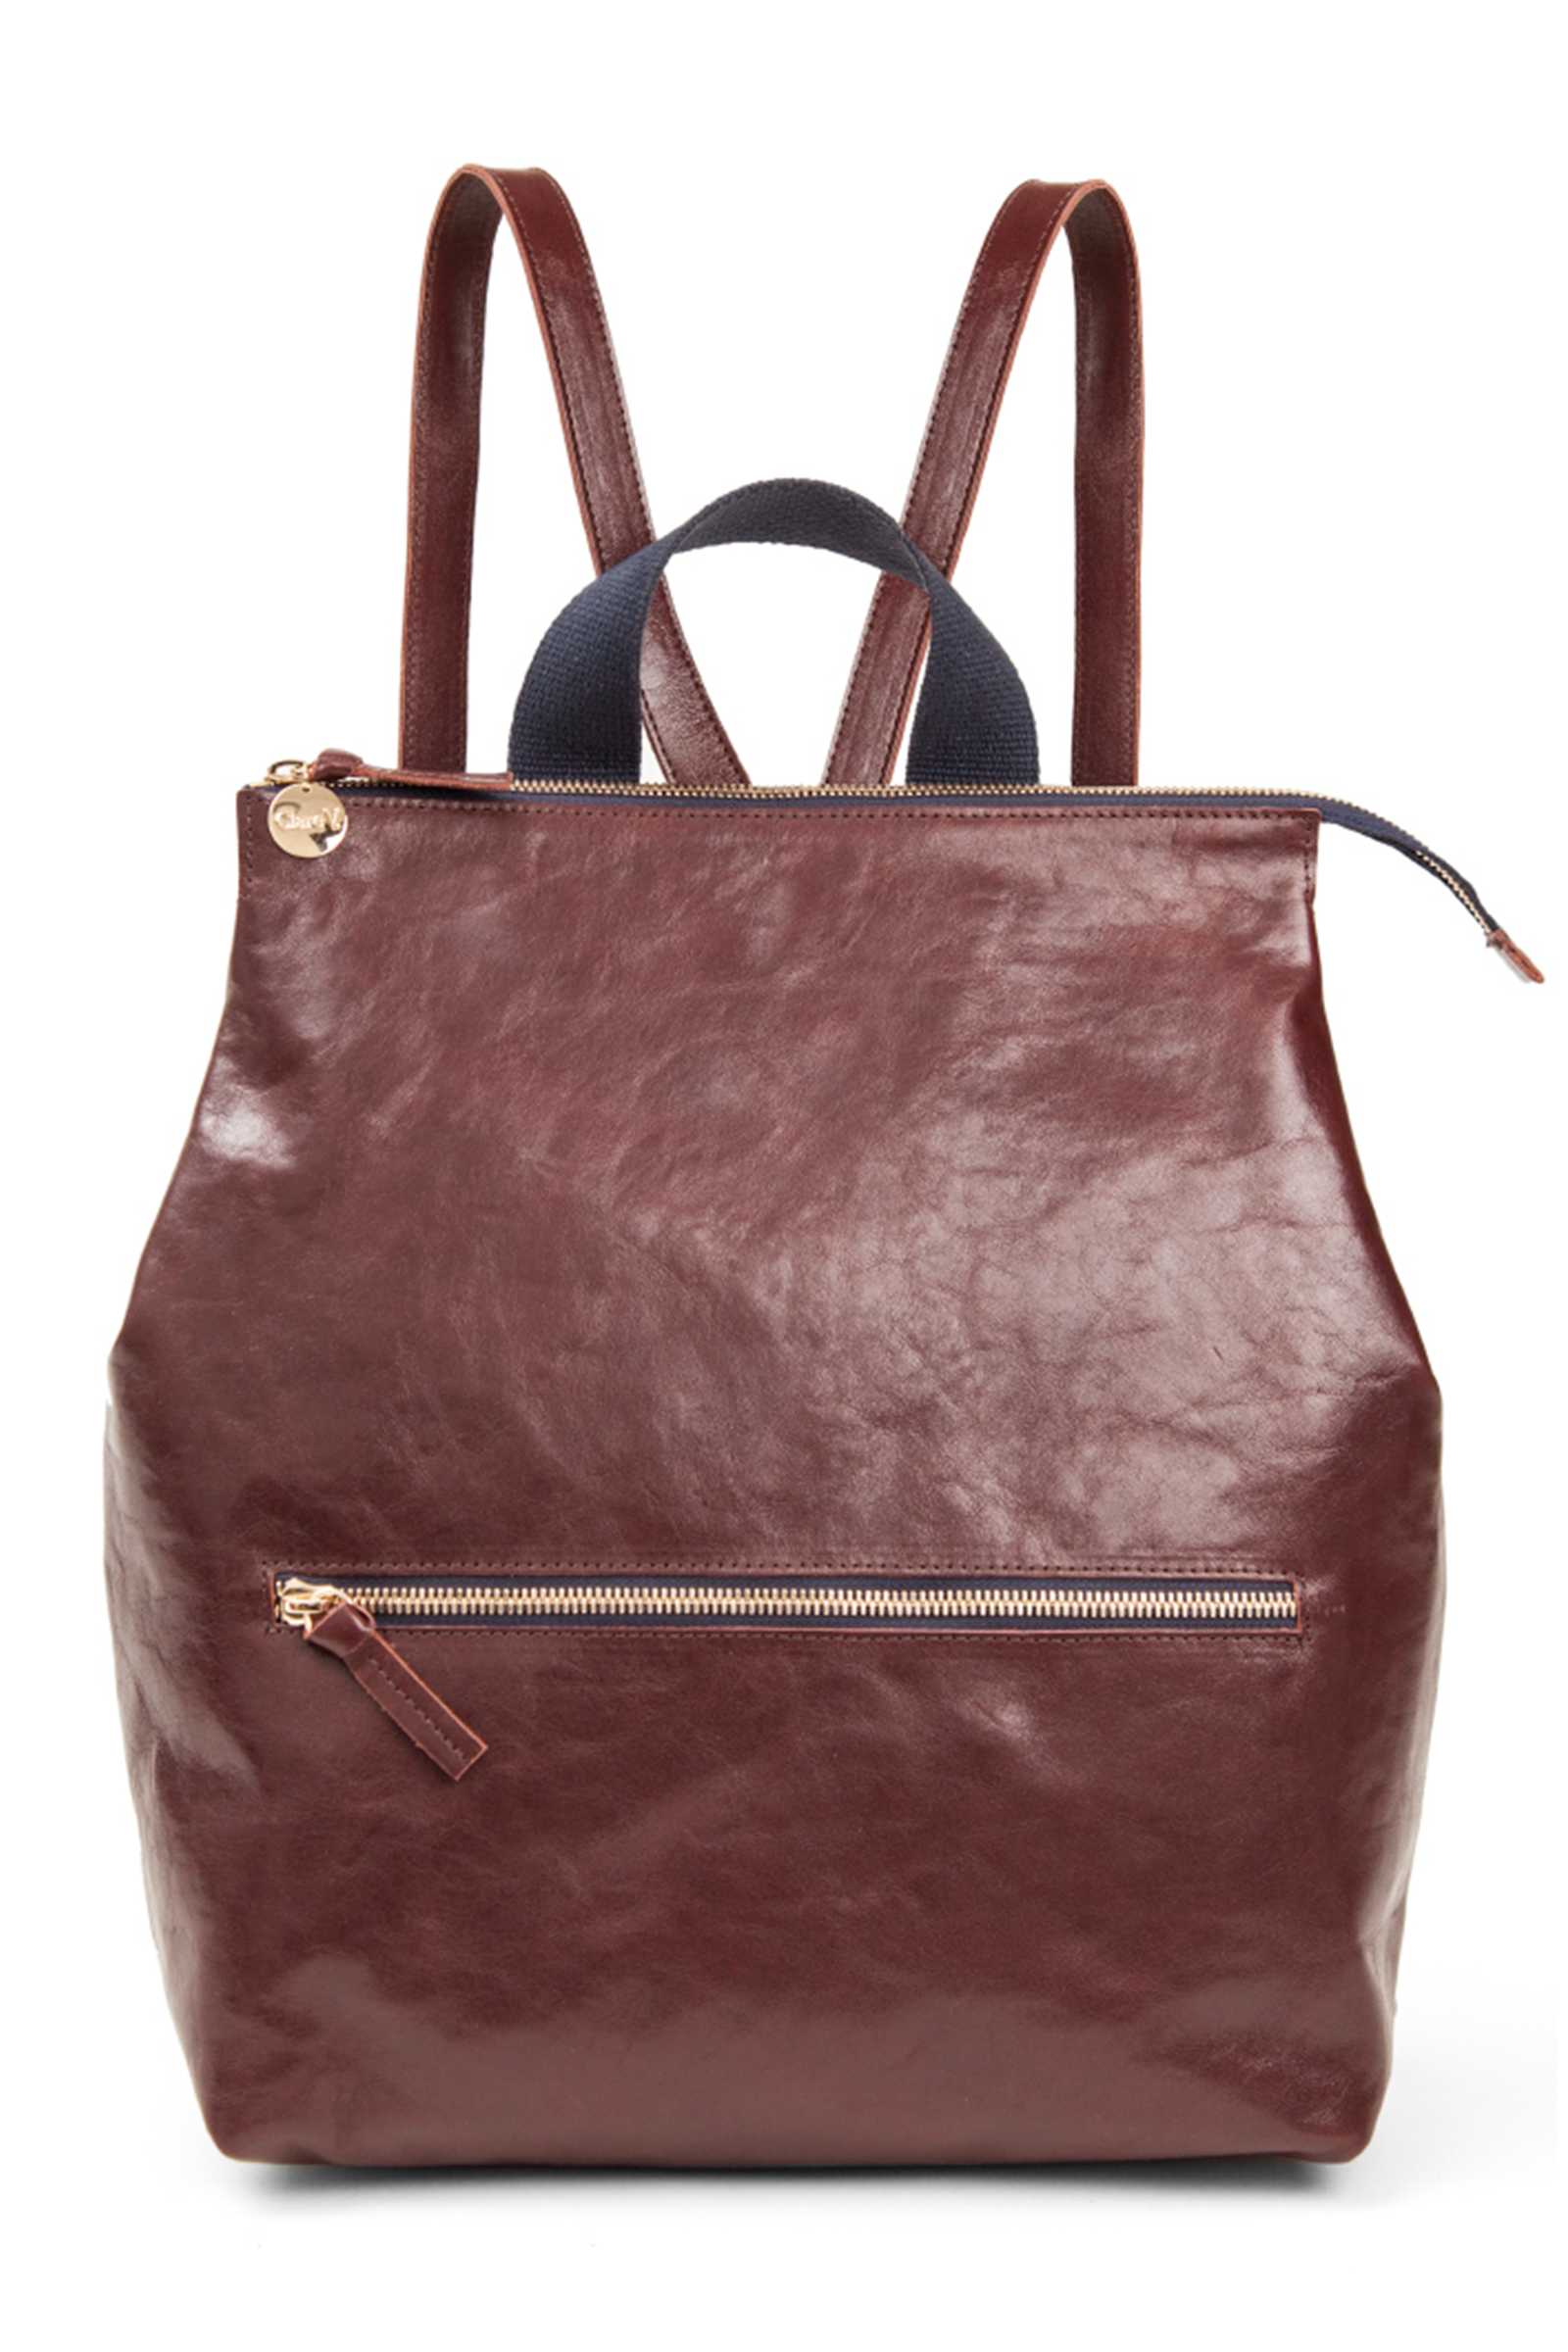 Clare Vivier Remi Backpack in Walnut Lightweight Rustic